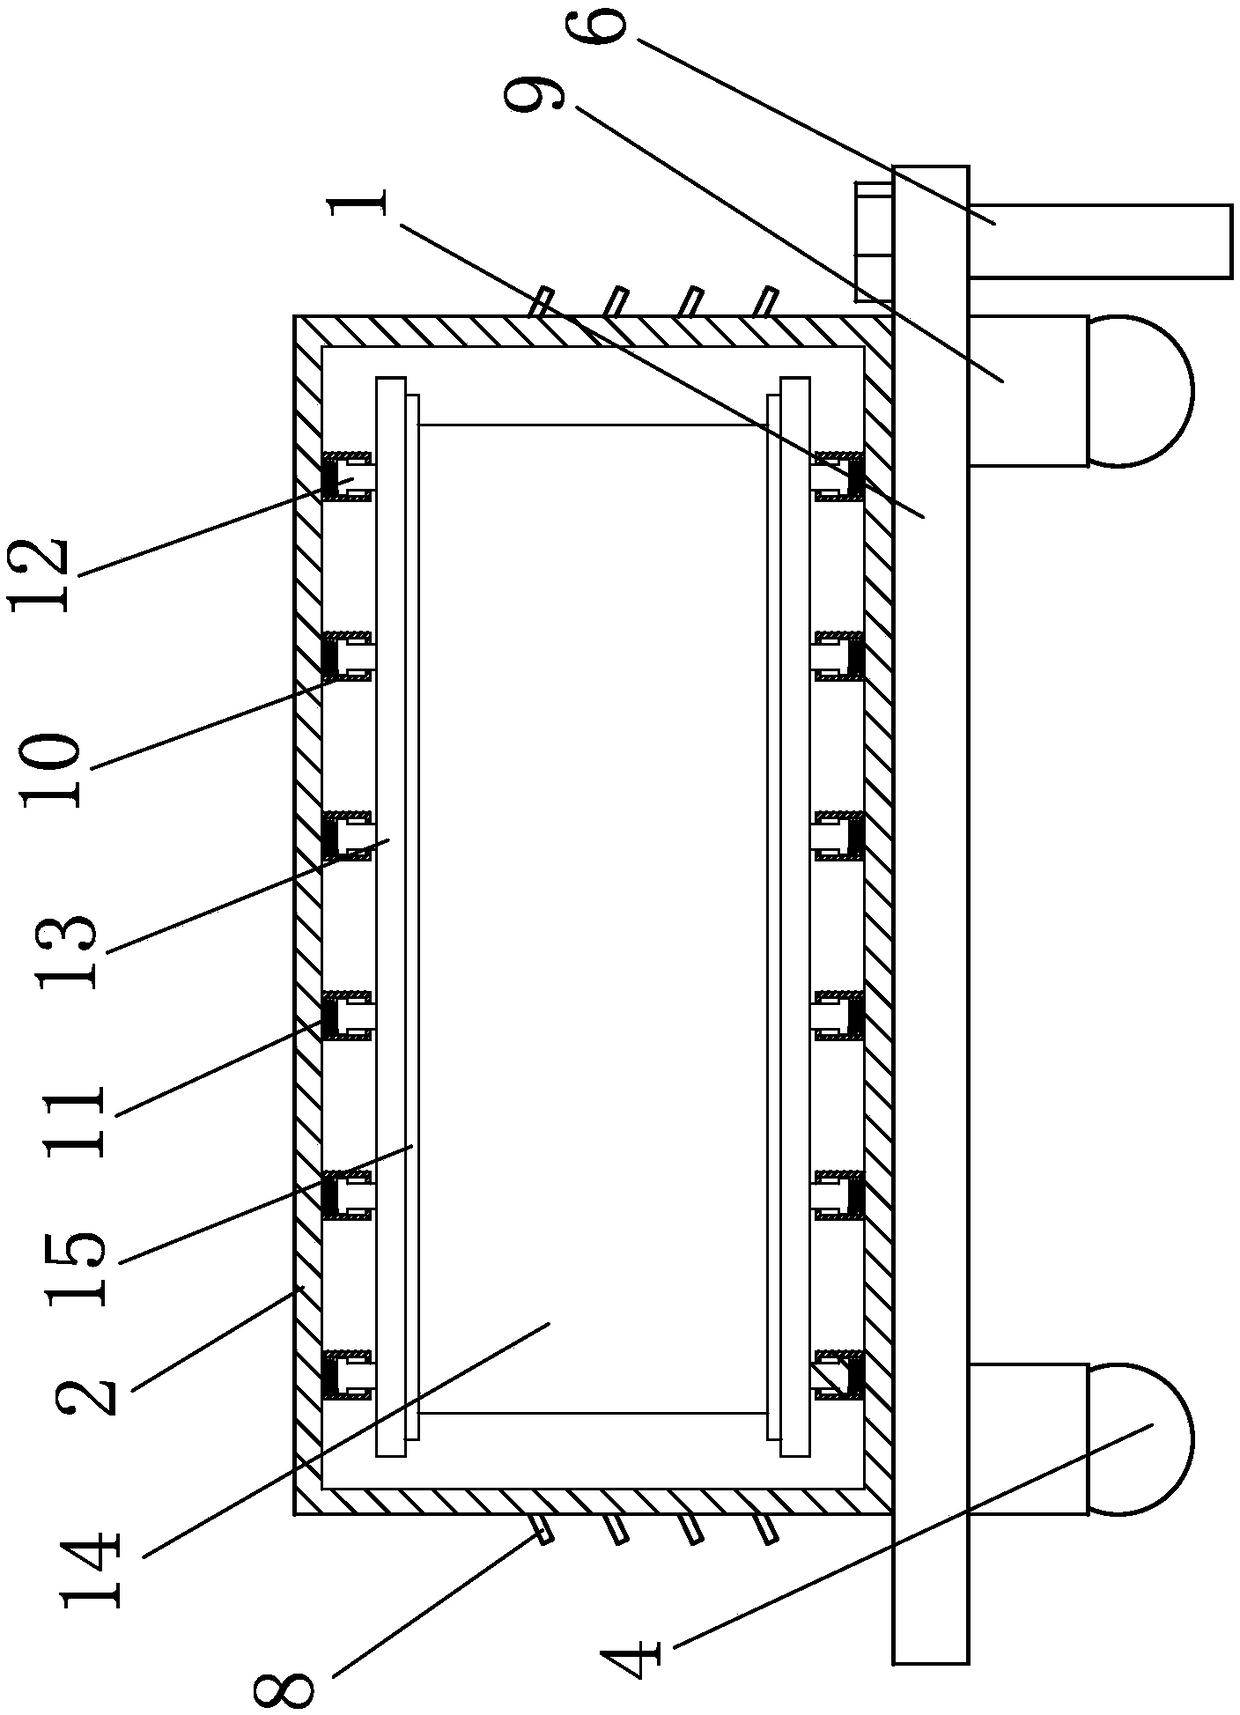 Movably mounted efficient damping type transformer